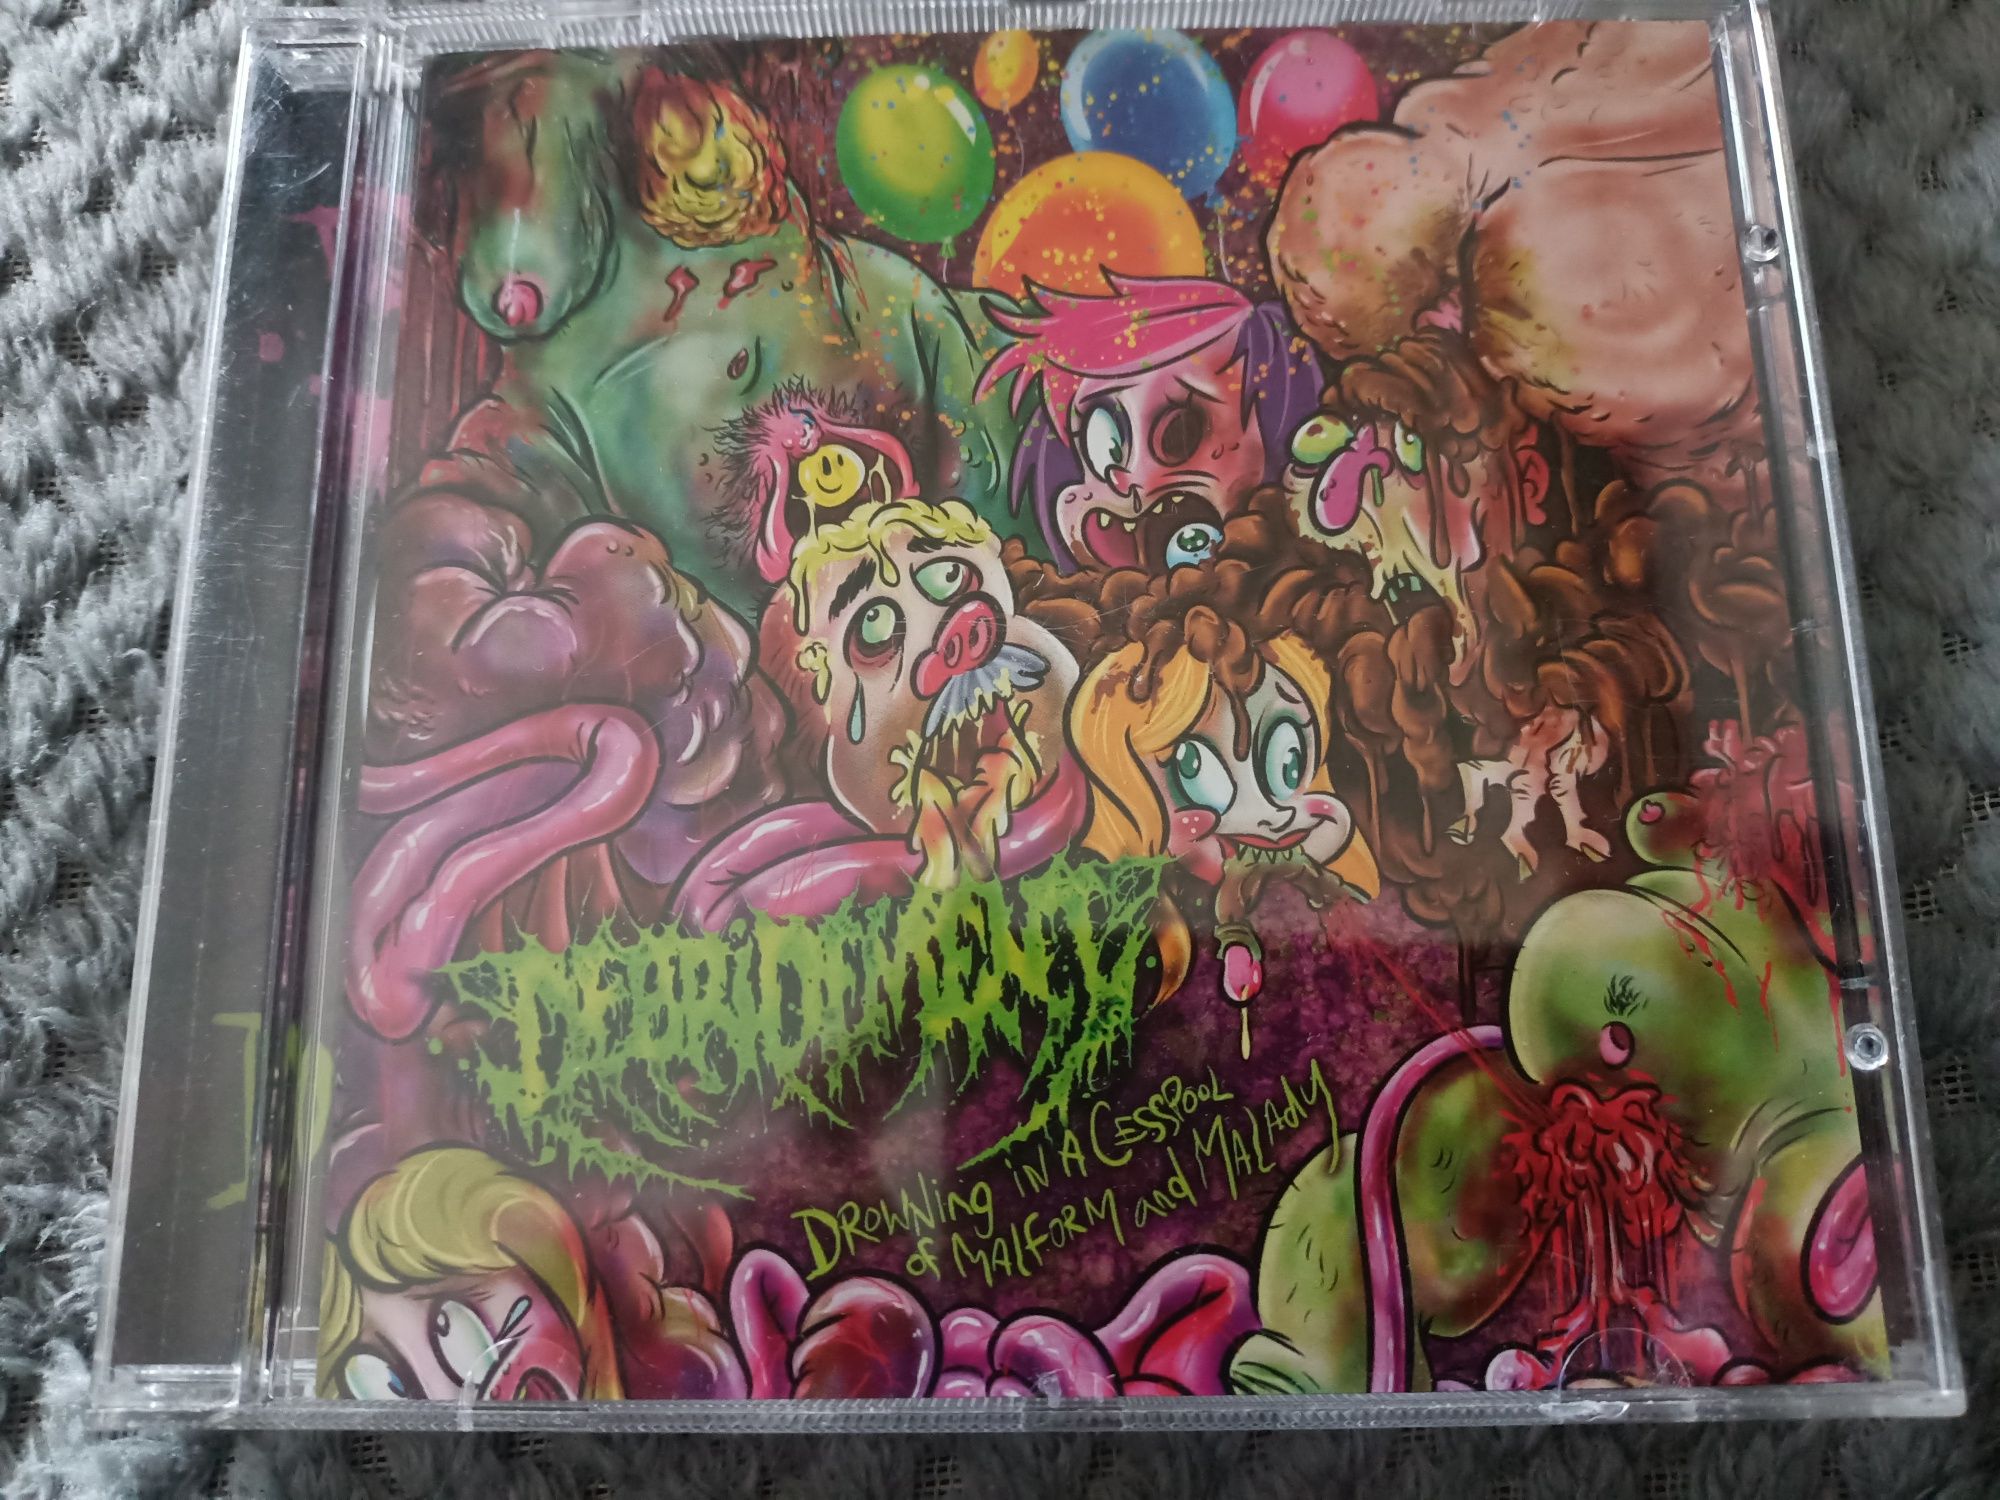 Debridement - Drowning In A Cesspool Of Malform And Malady (CD, Album)